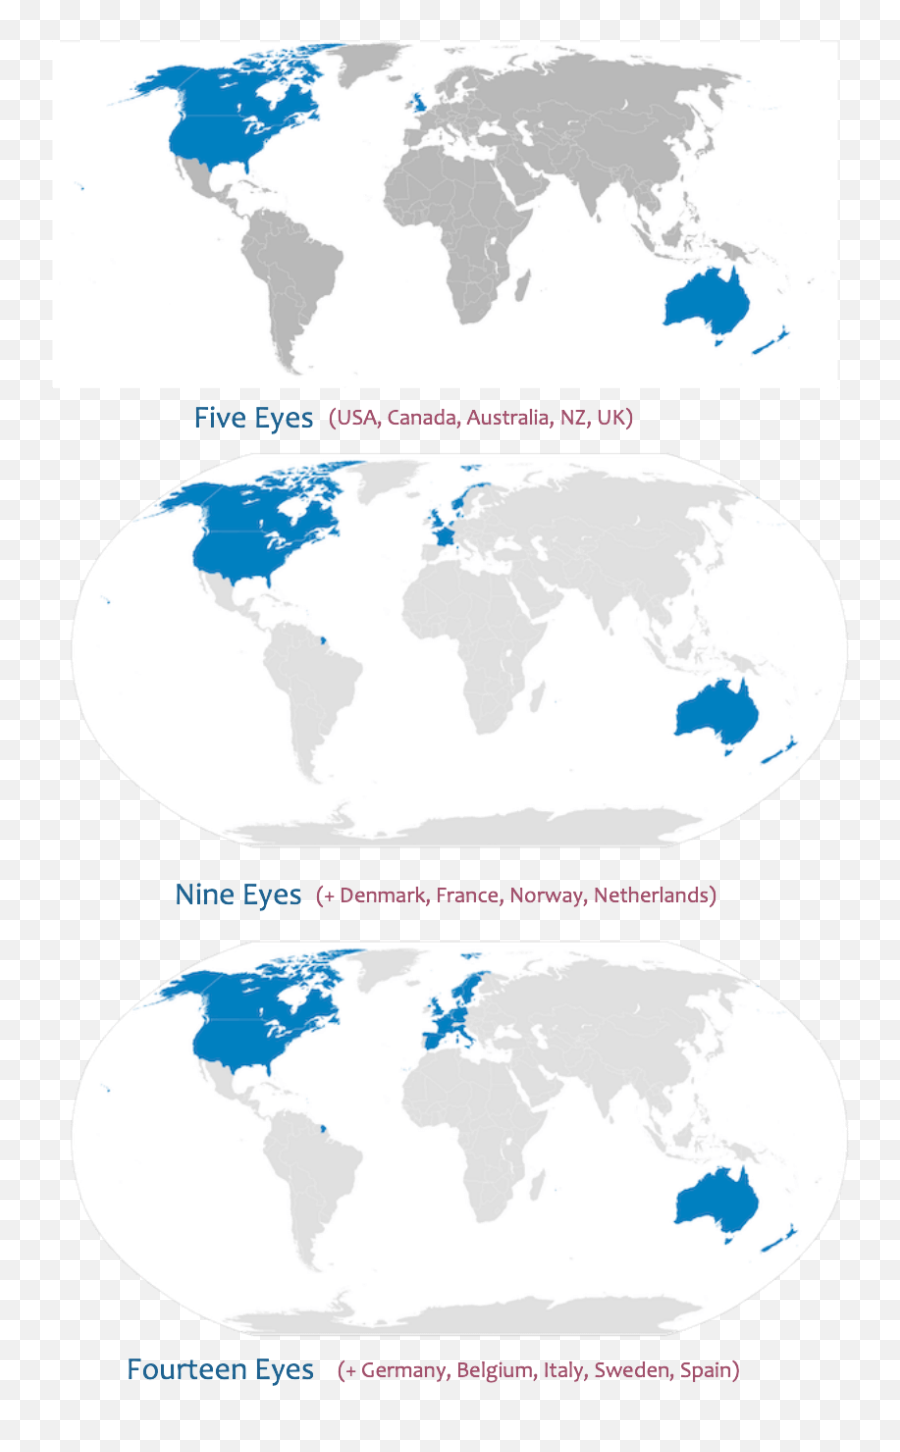 A Complete Guide To Online Privacy In 2019 - Vpncrew Energy Consumption Map Per Person Png,Spybot Icon